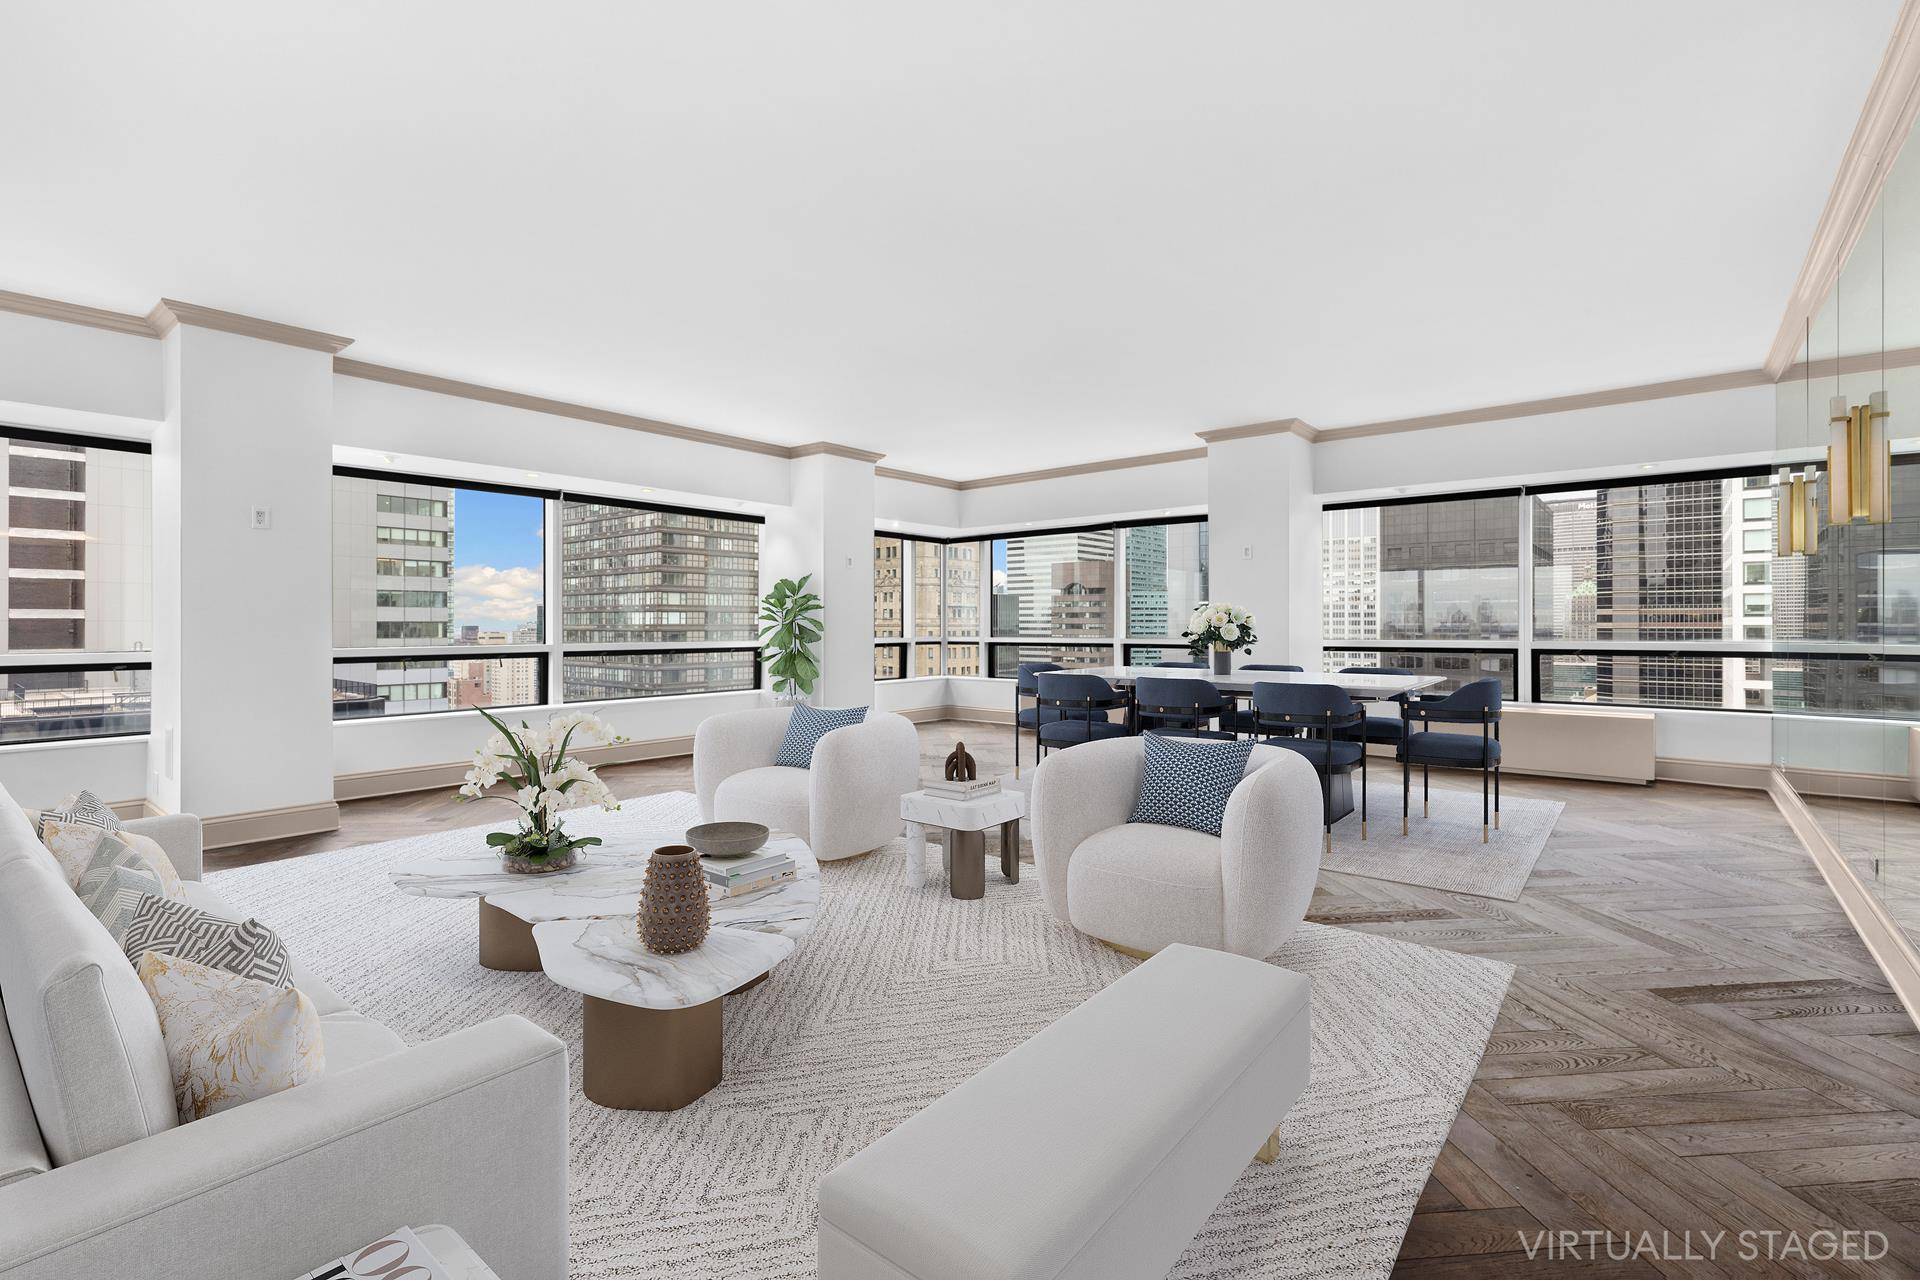 Following an extensive renovation during our initial 120 days on the market, 500 Park Ave, Apt.